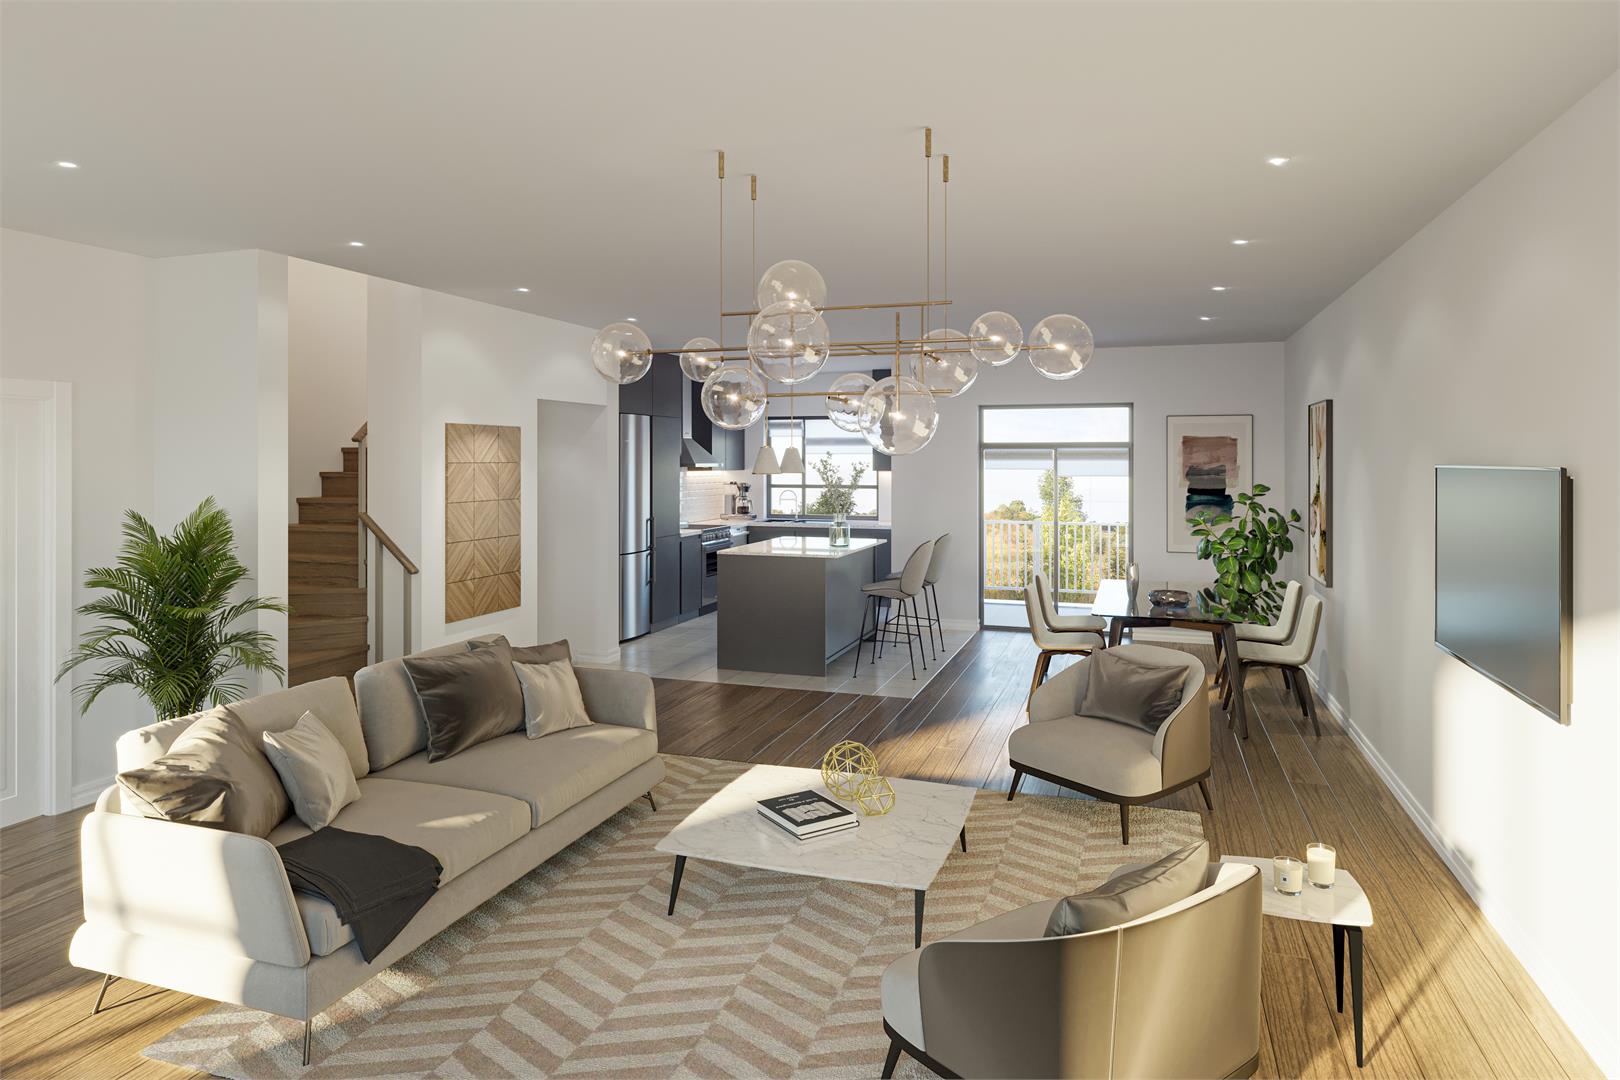 Rendering of Markham GOLD towns interior living room